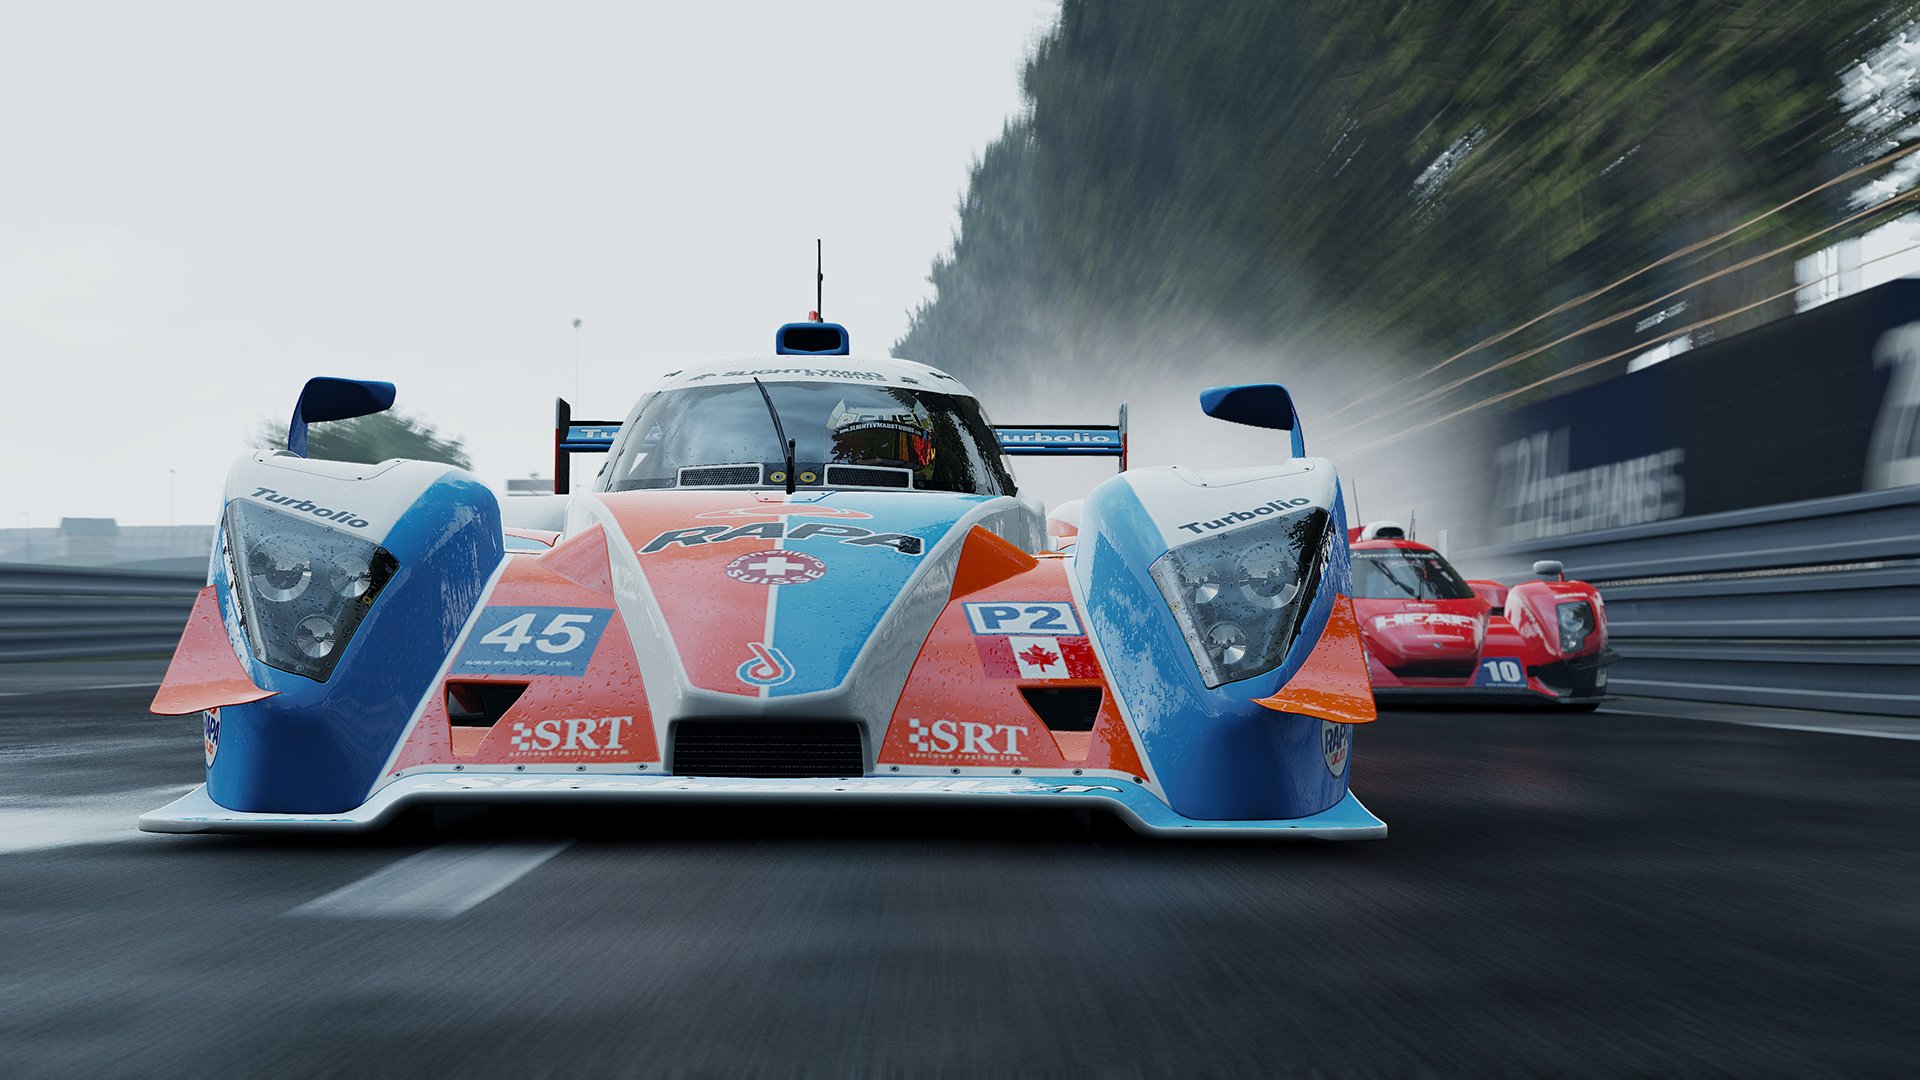 Project Cars 4 Leaves a Big Gap in the Racing Game Landscape